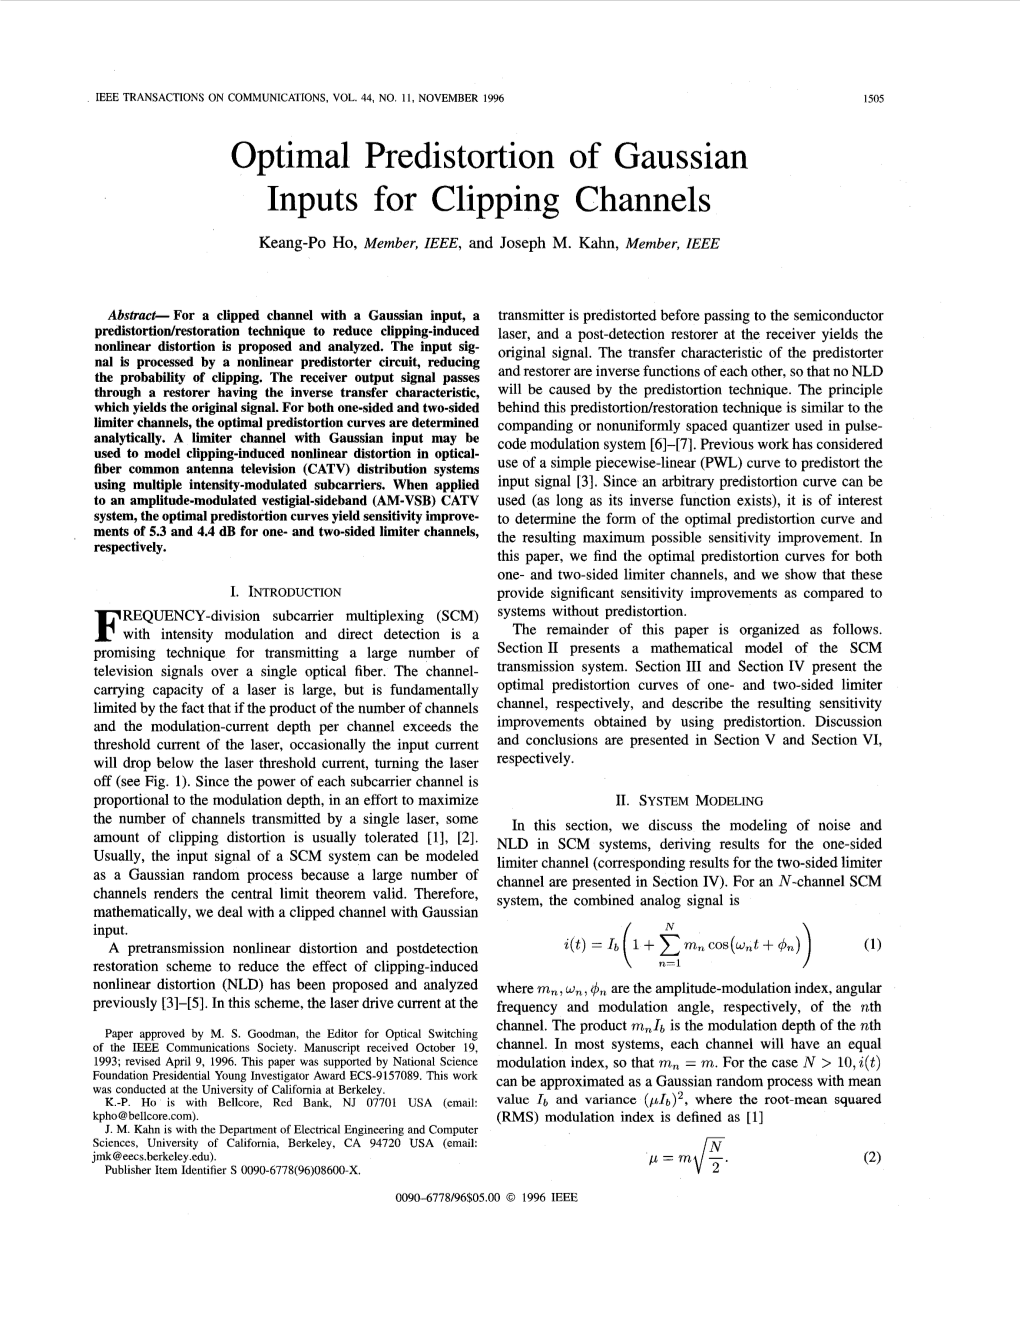 Optimal Predistortion of Gaussian Inputs for Clipping Channels